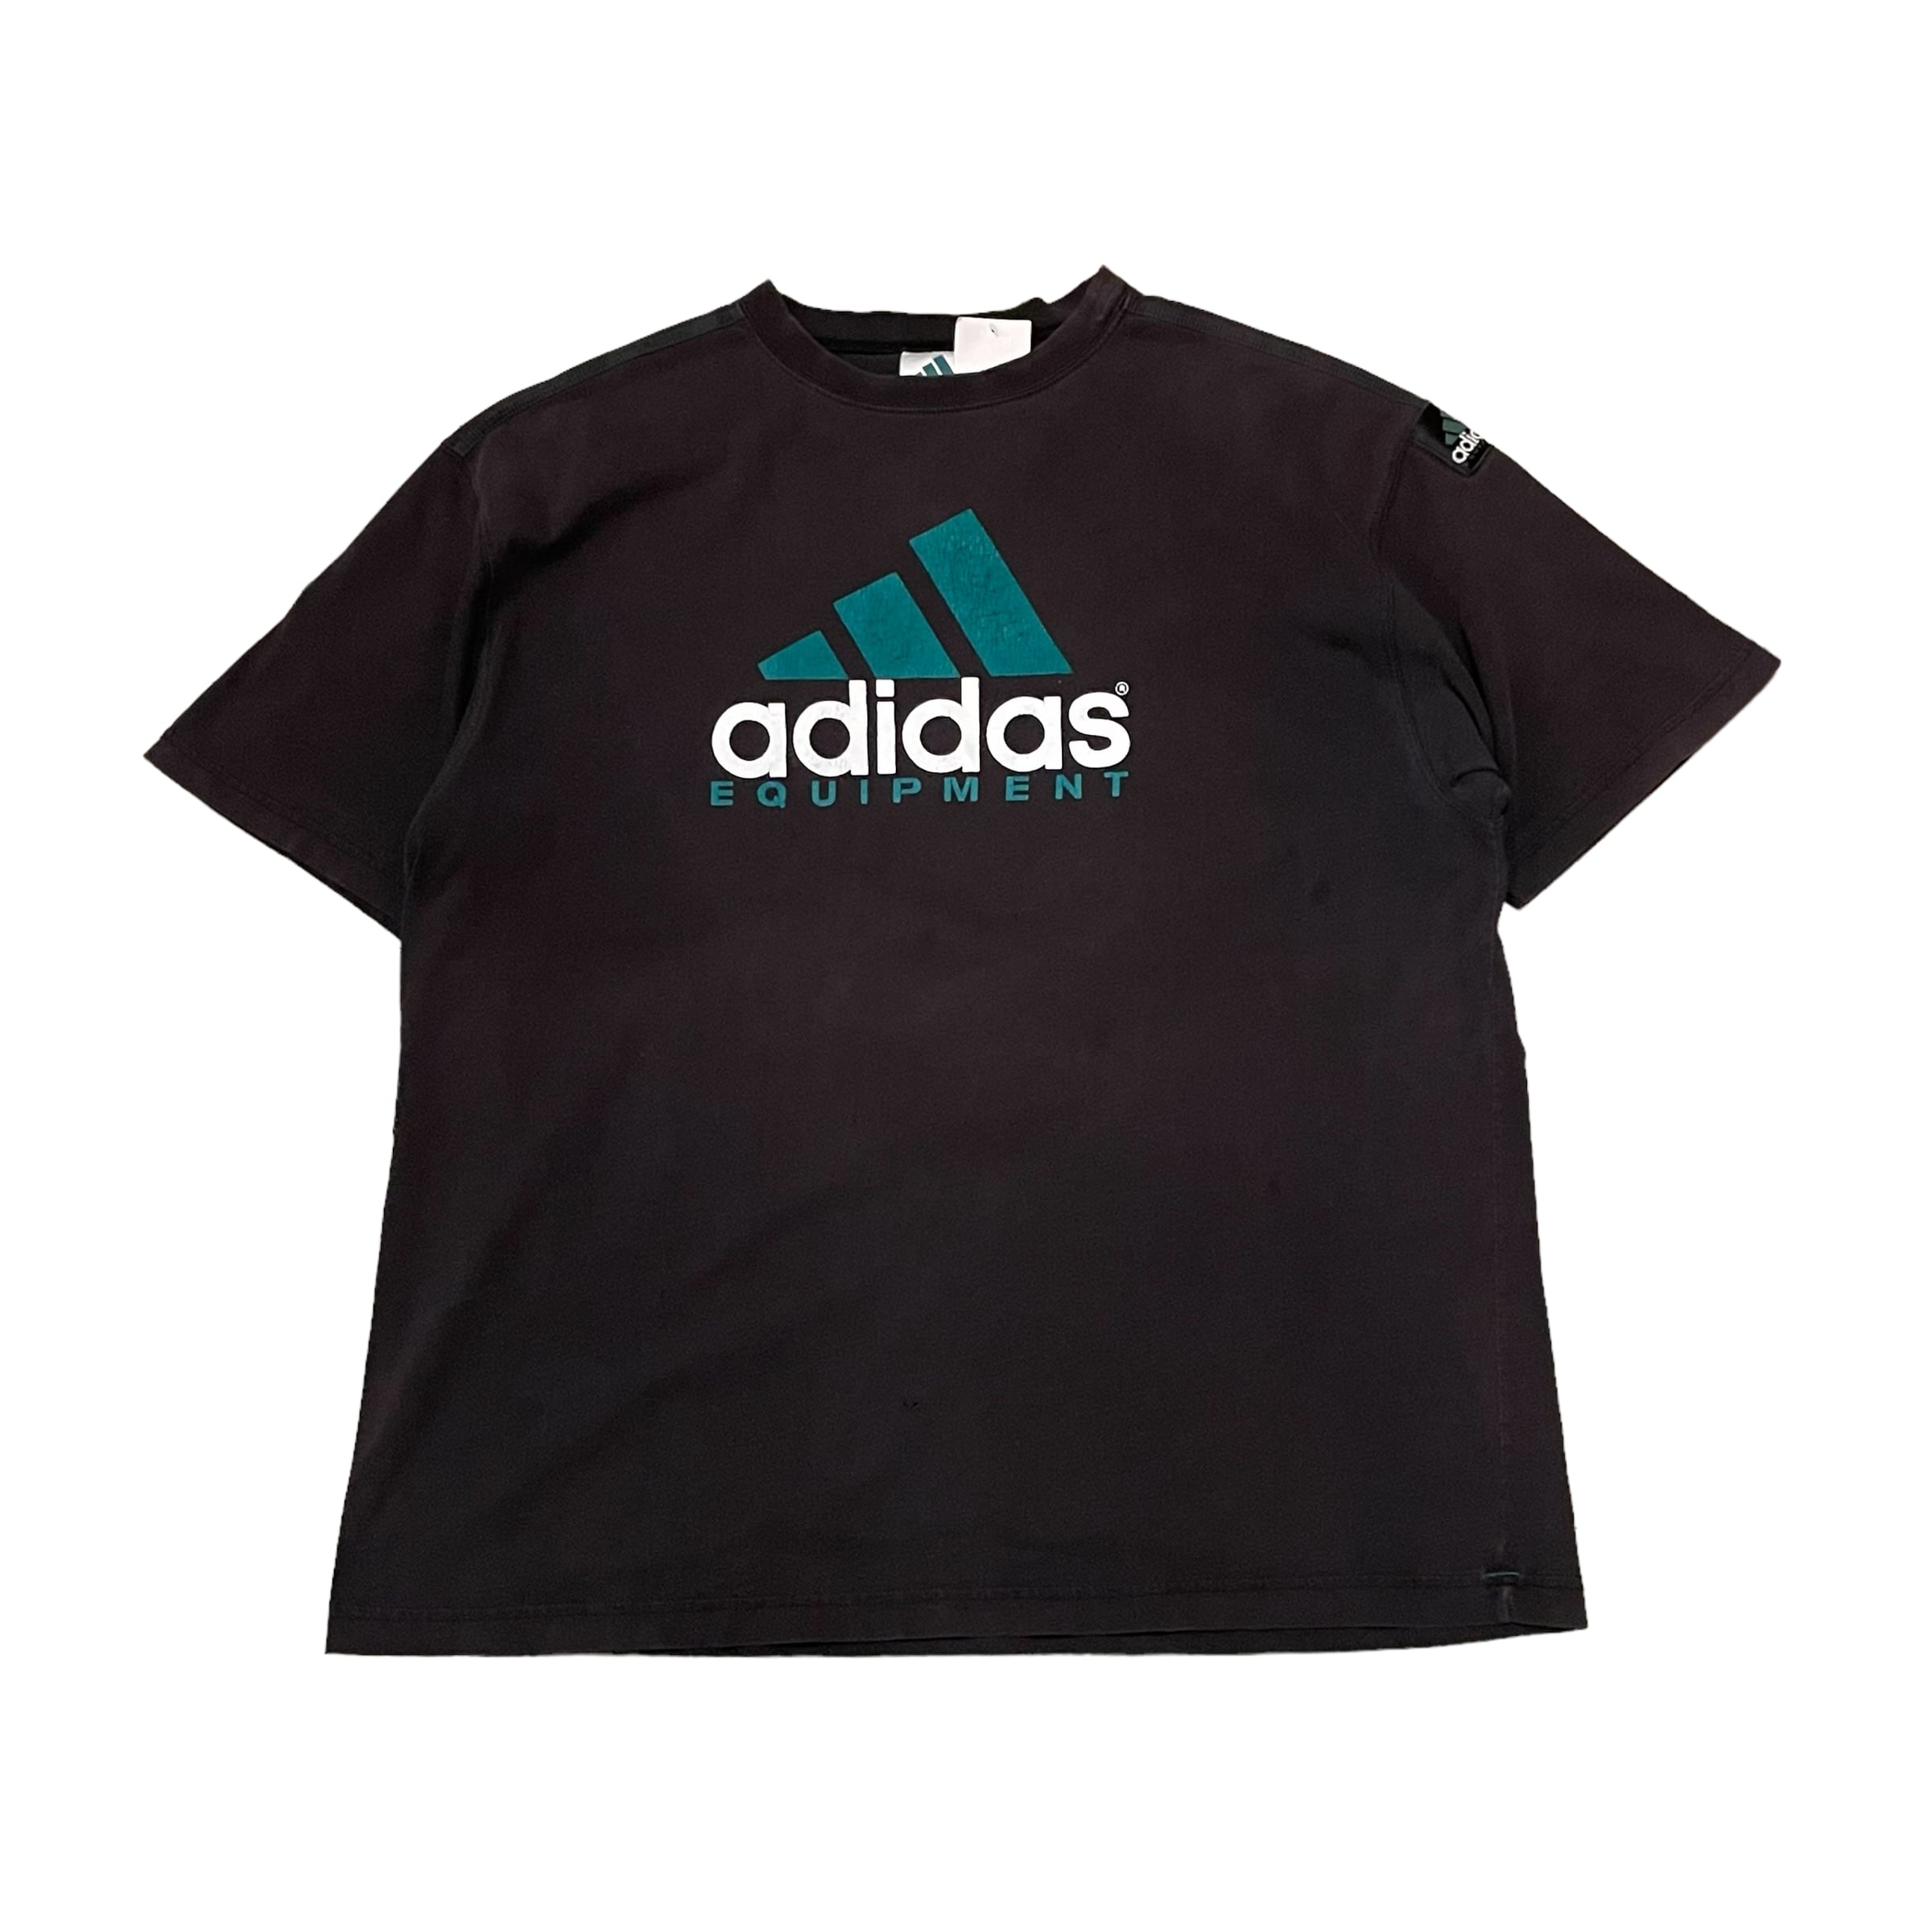 90s adidas EQUIPMENT t-shirt | What'z up